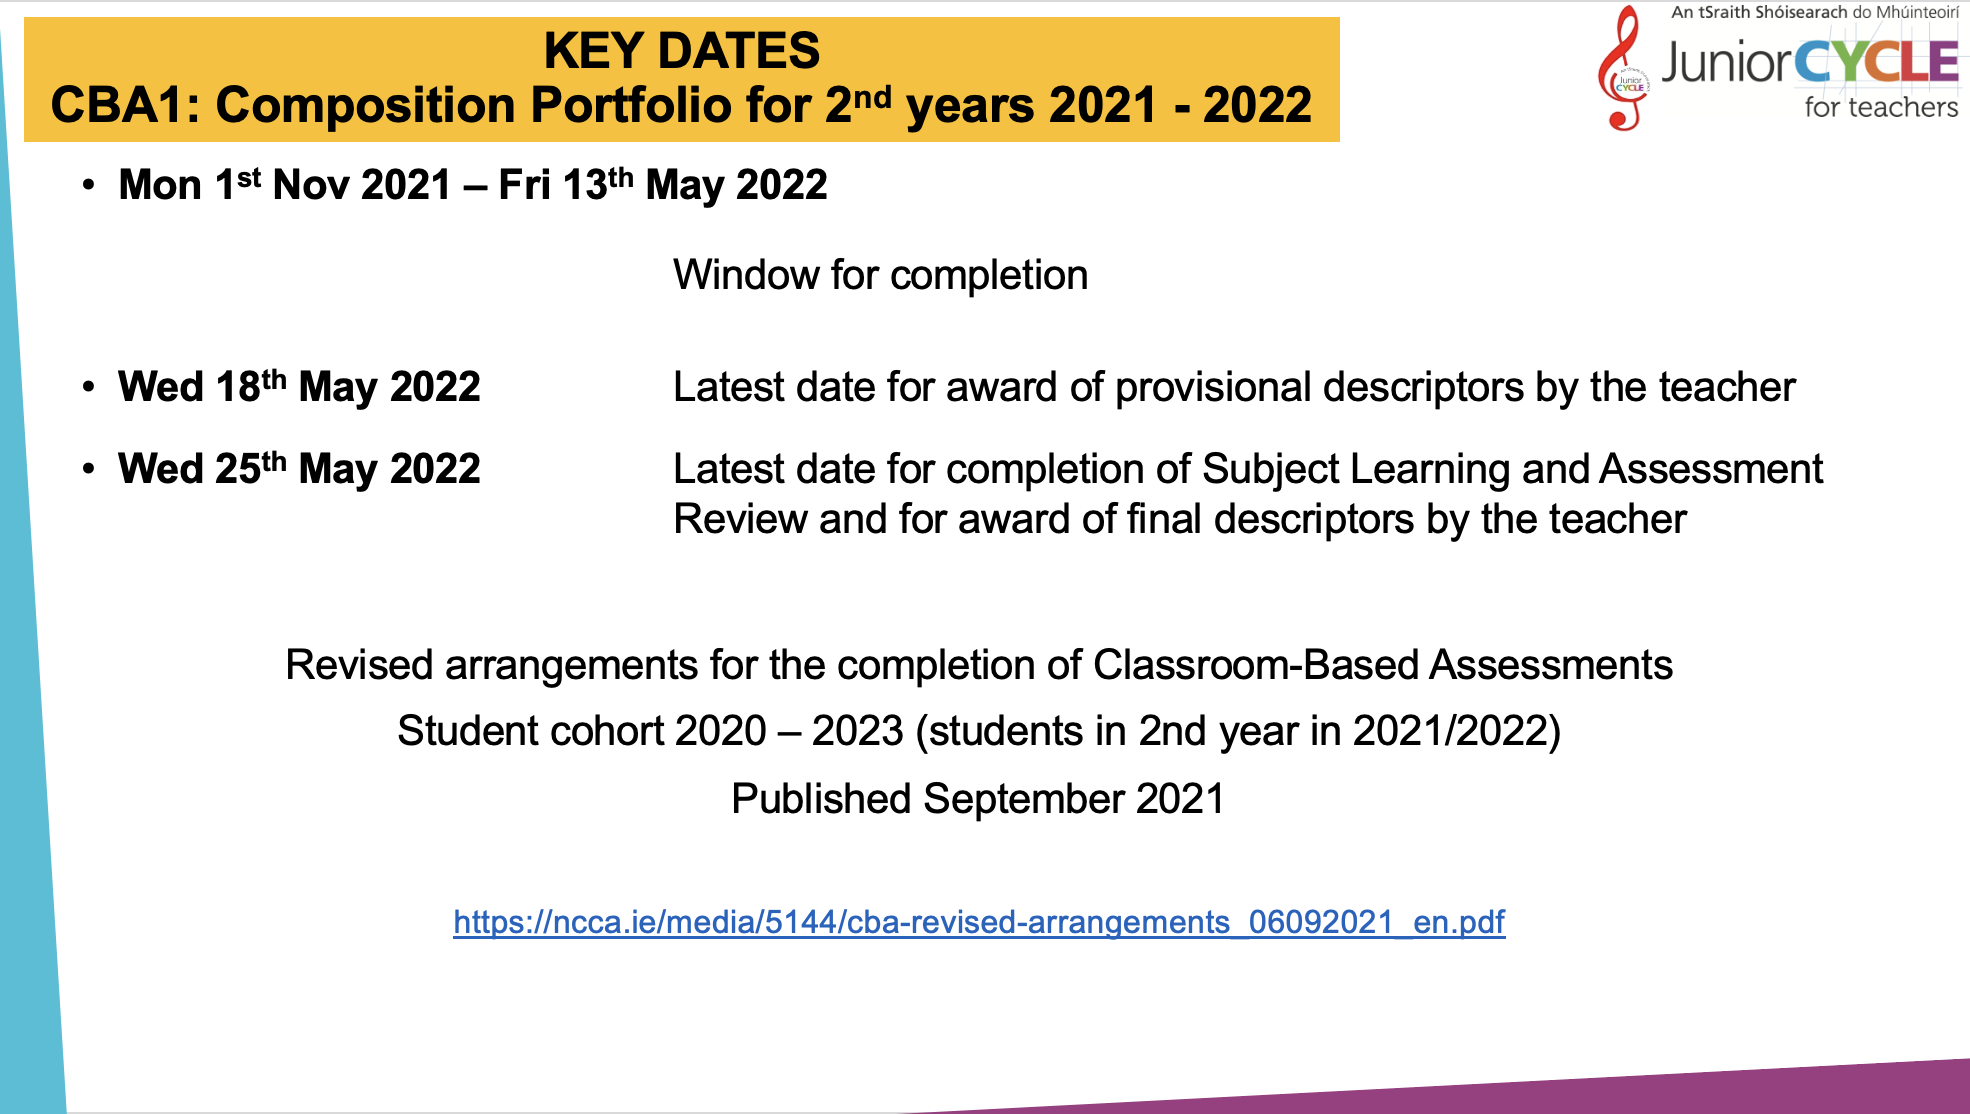 CBA1: Composition Portfolio for 2nd years 2021 - 2022